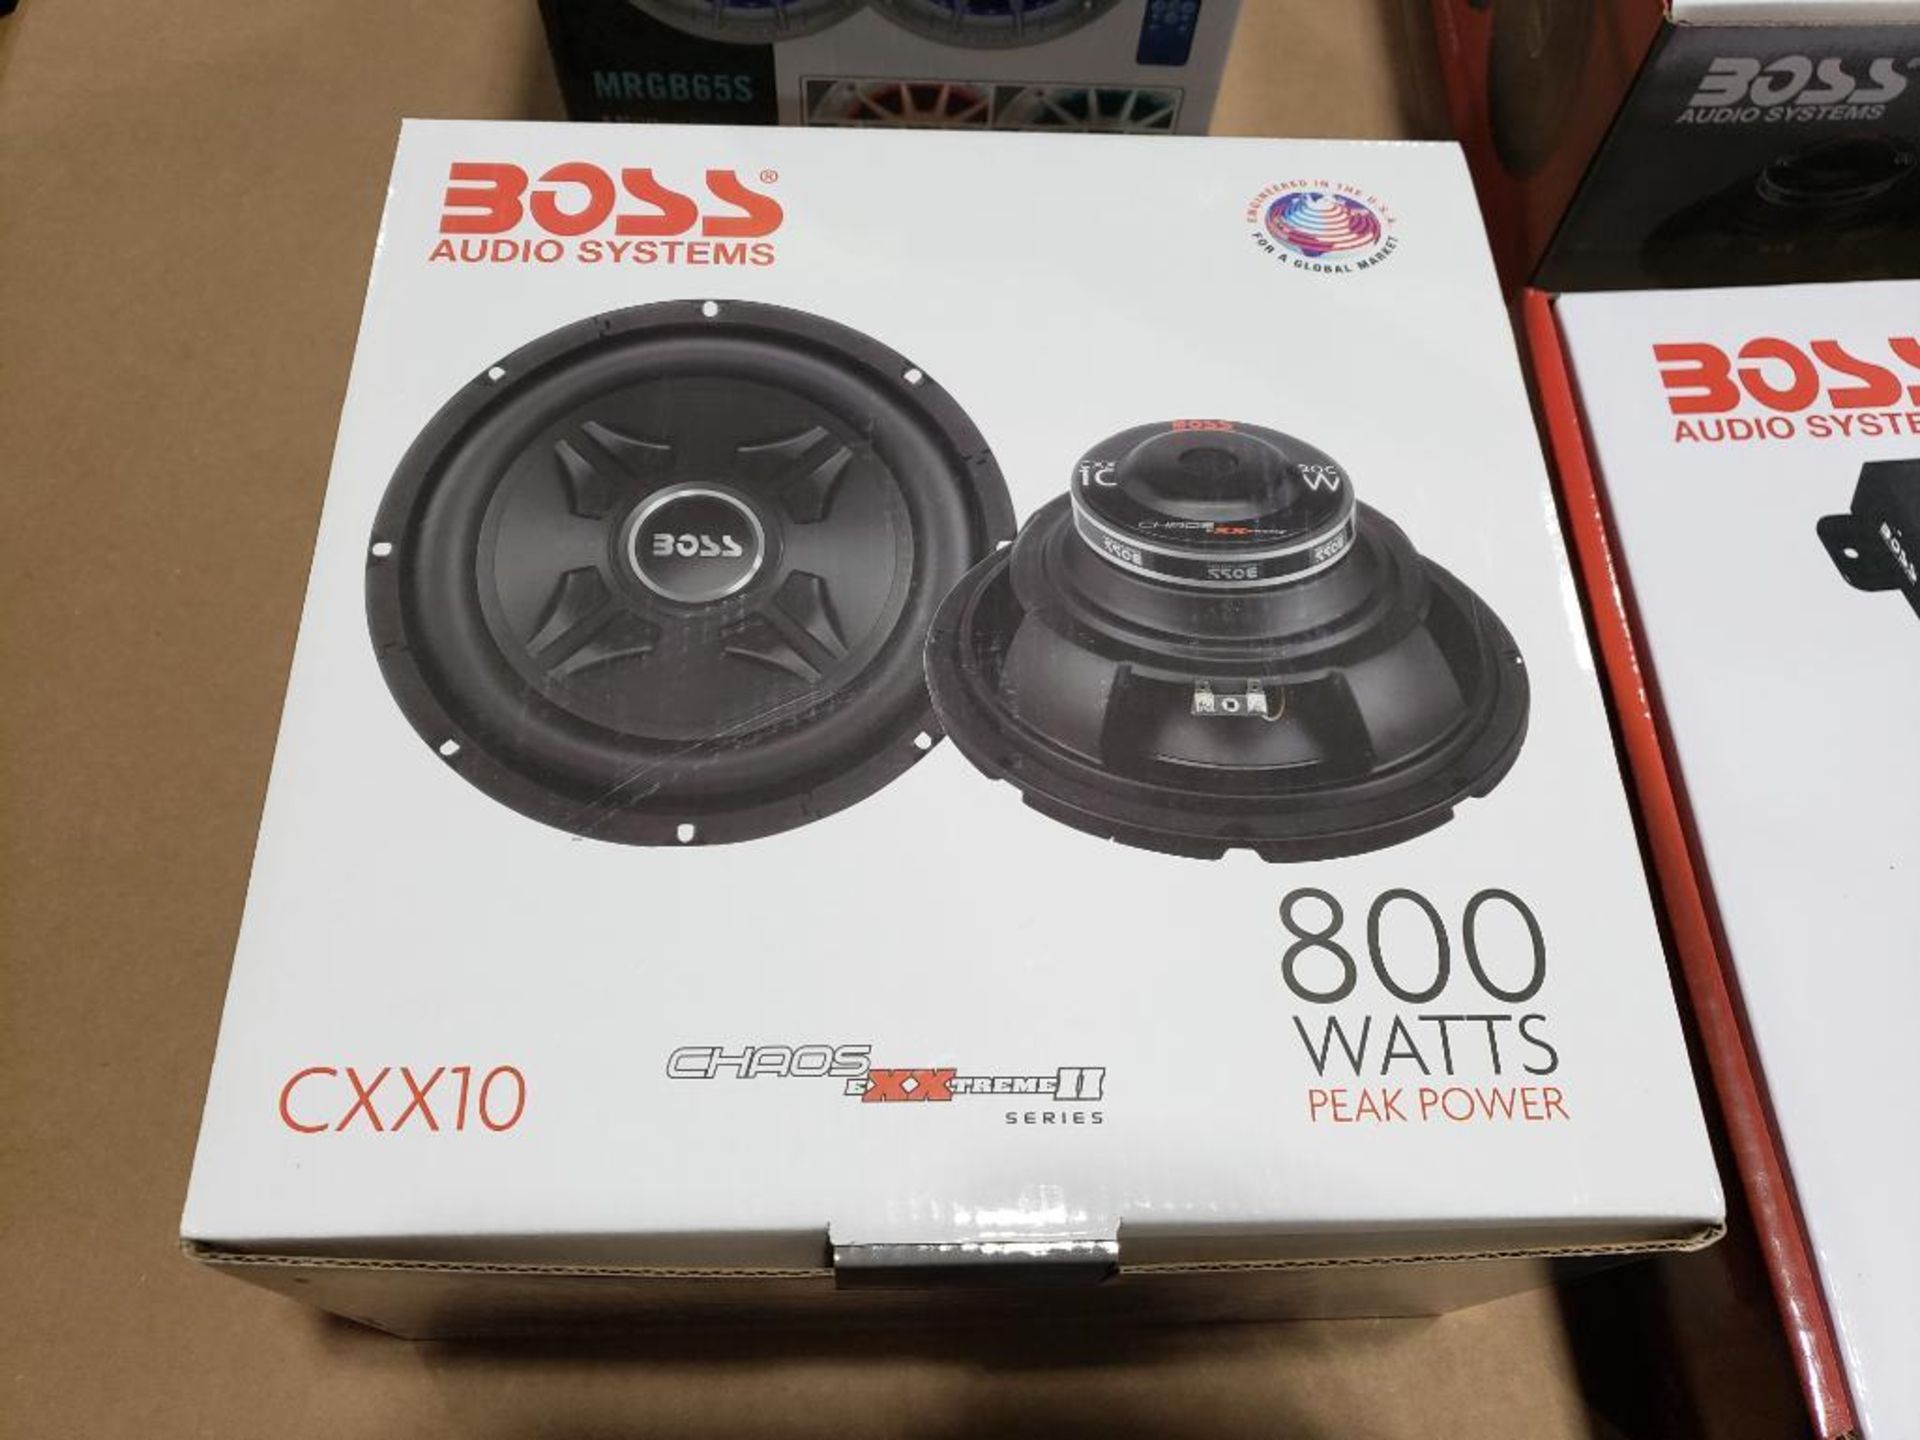 Qty 4 - 3 pairs of assorted Boss speakers and one Boss amp. - Image 6 of 11